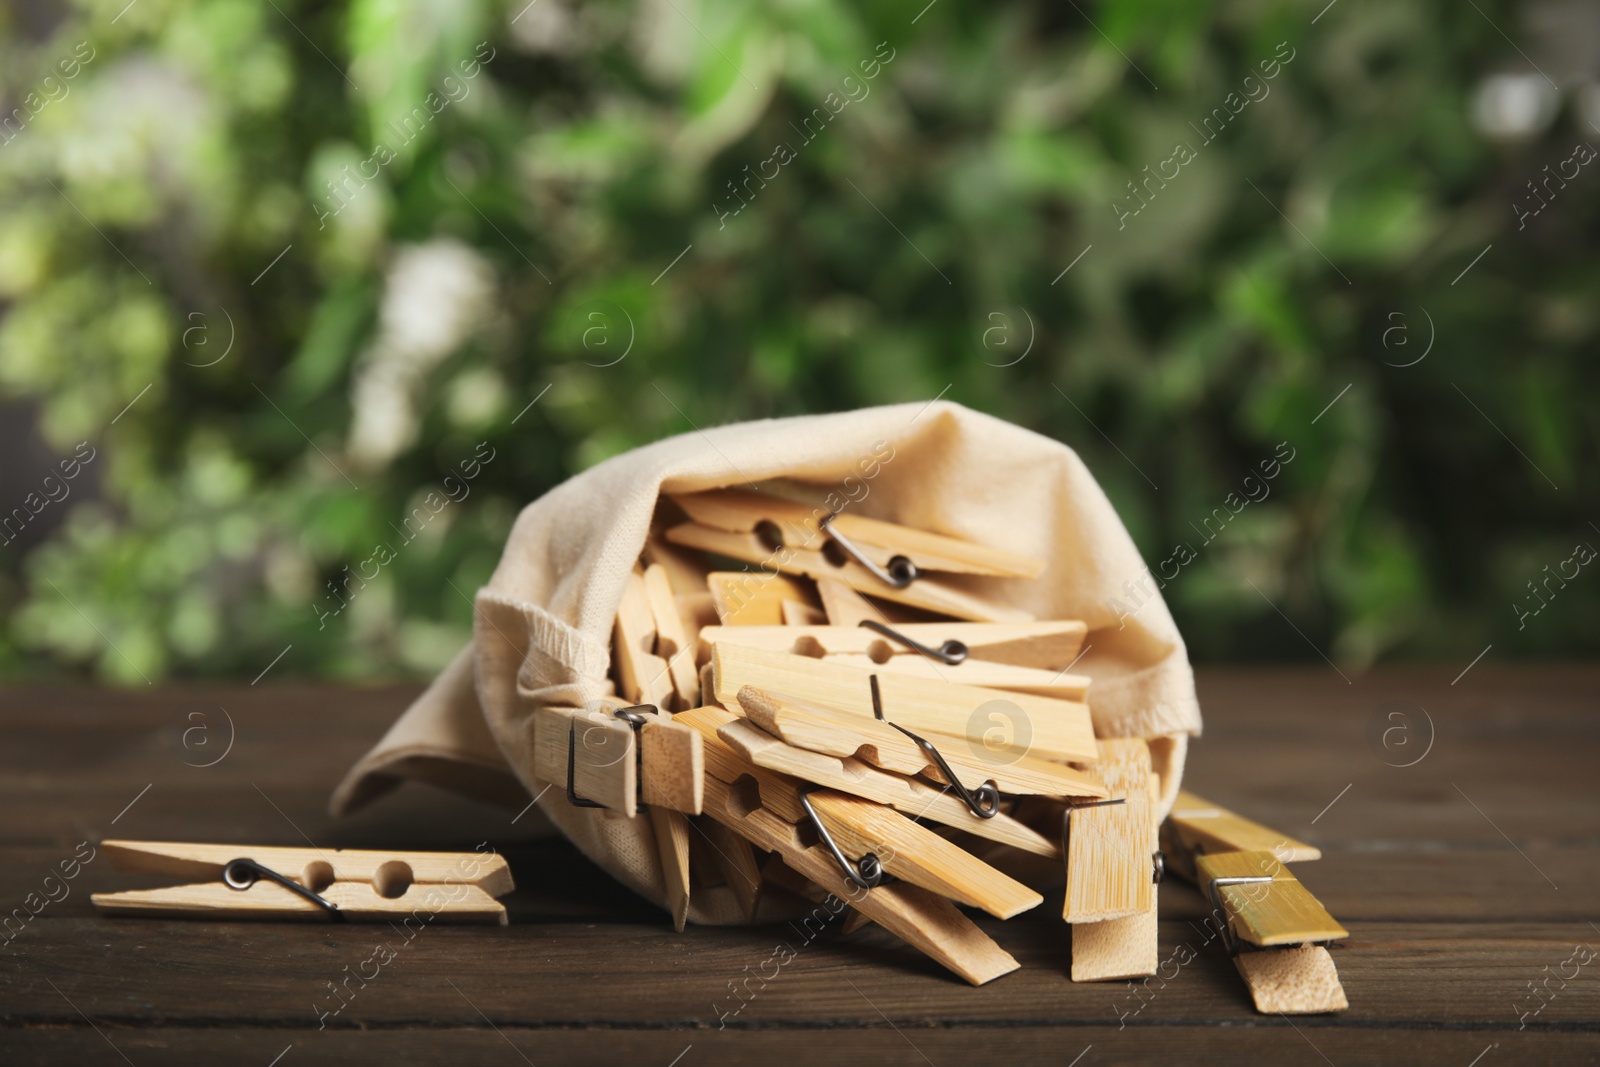 Photo of Sack bag with wooden clothespins on table against blurred green background